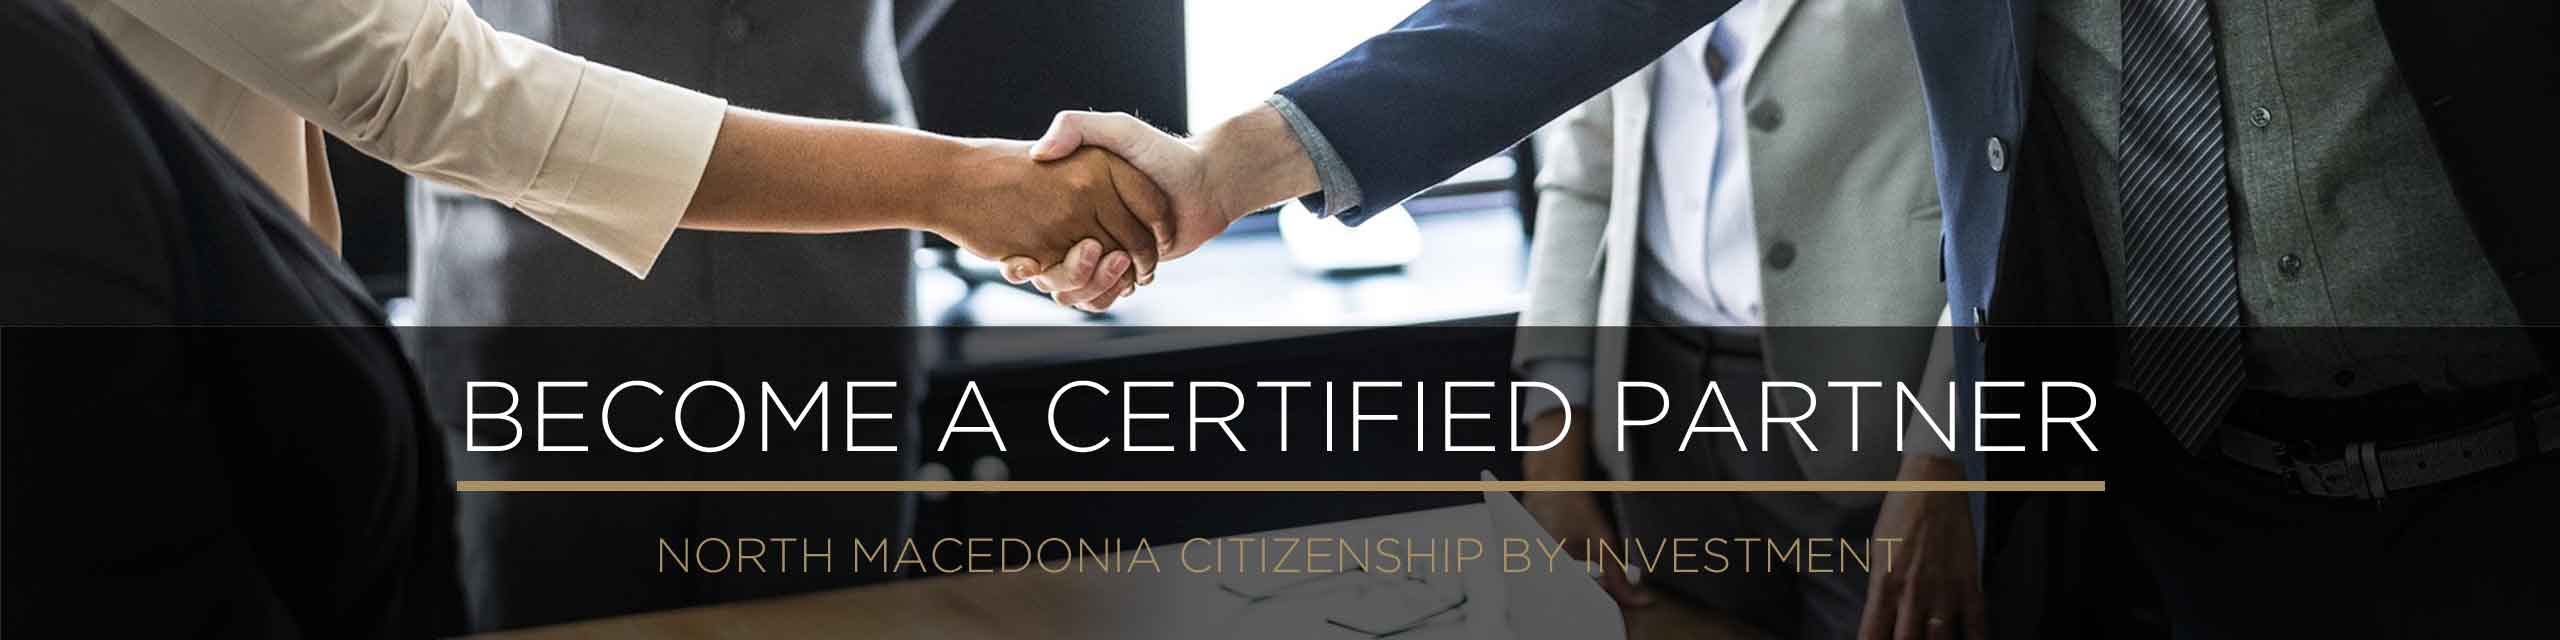 Become a Certified Partner of GCI - Global Citizenship Investment